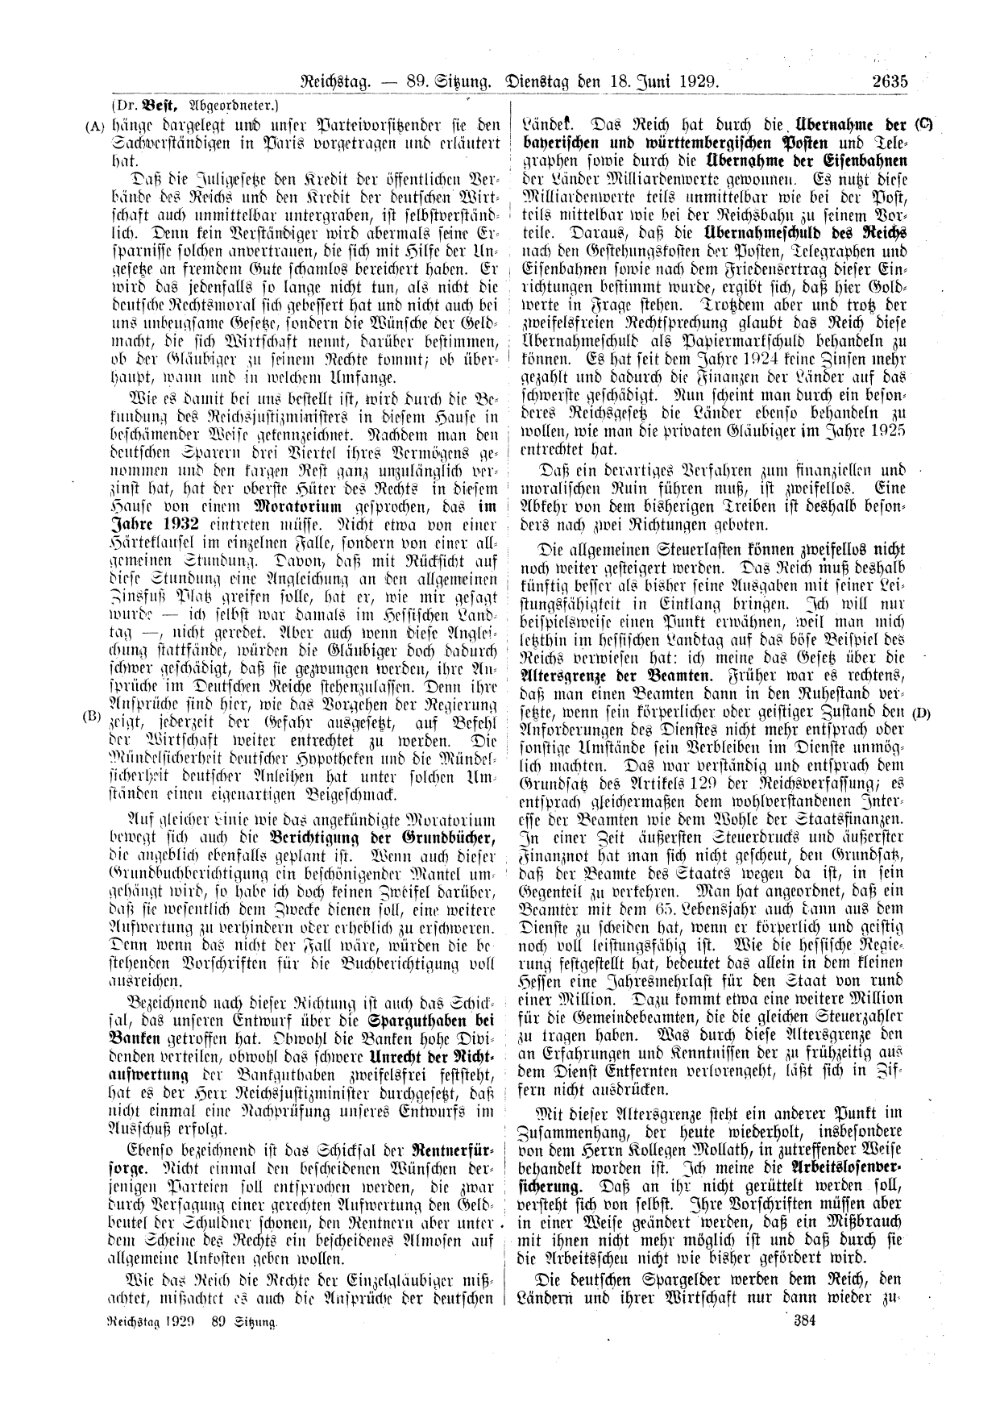 Scan of page 2635